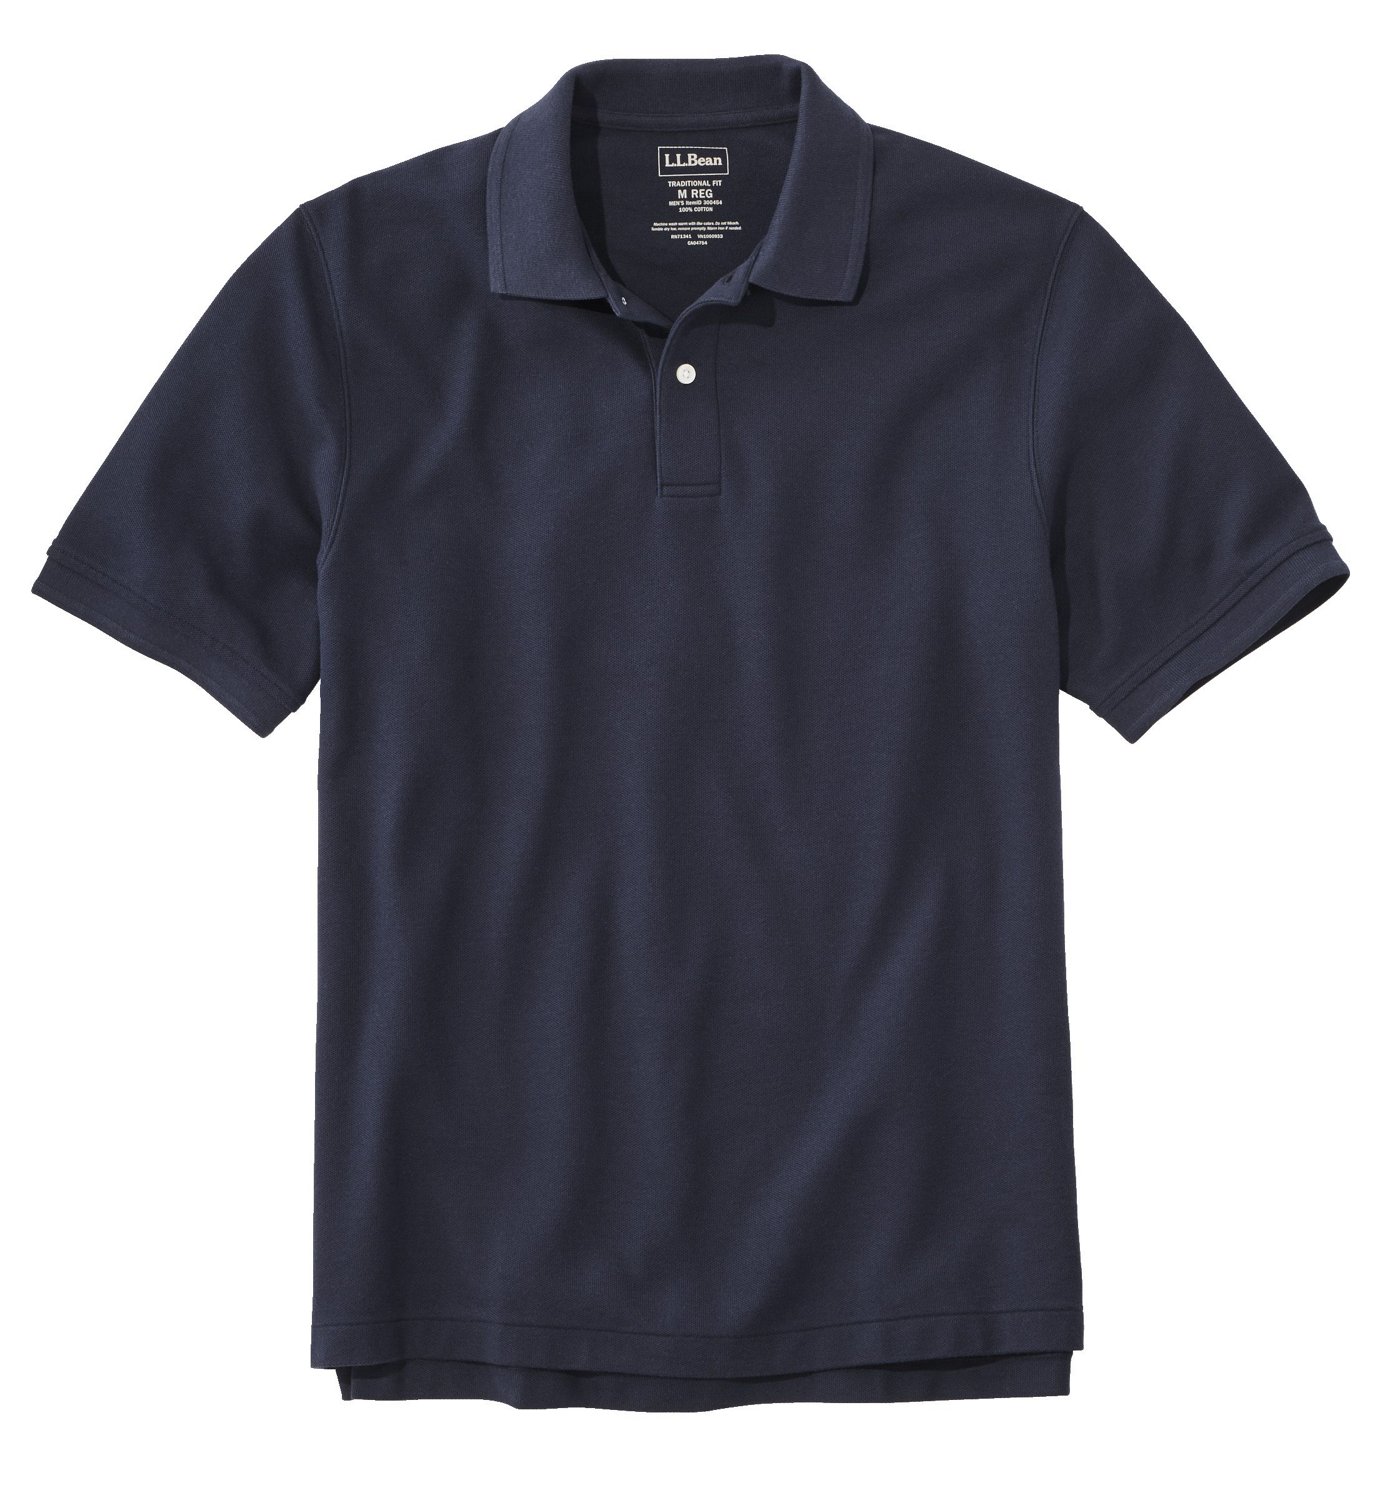 https://academy.scene7.com/is/image/academy//shirts/llbean-mens-premium-double-l-polo-shirt-300454-37948-blue/d74a0d126cfe405d912f479ede3d93f6?$pdp-mobile-gallery-ng$